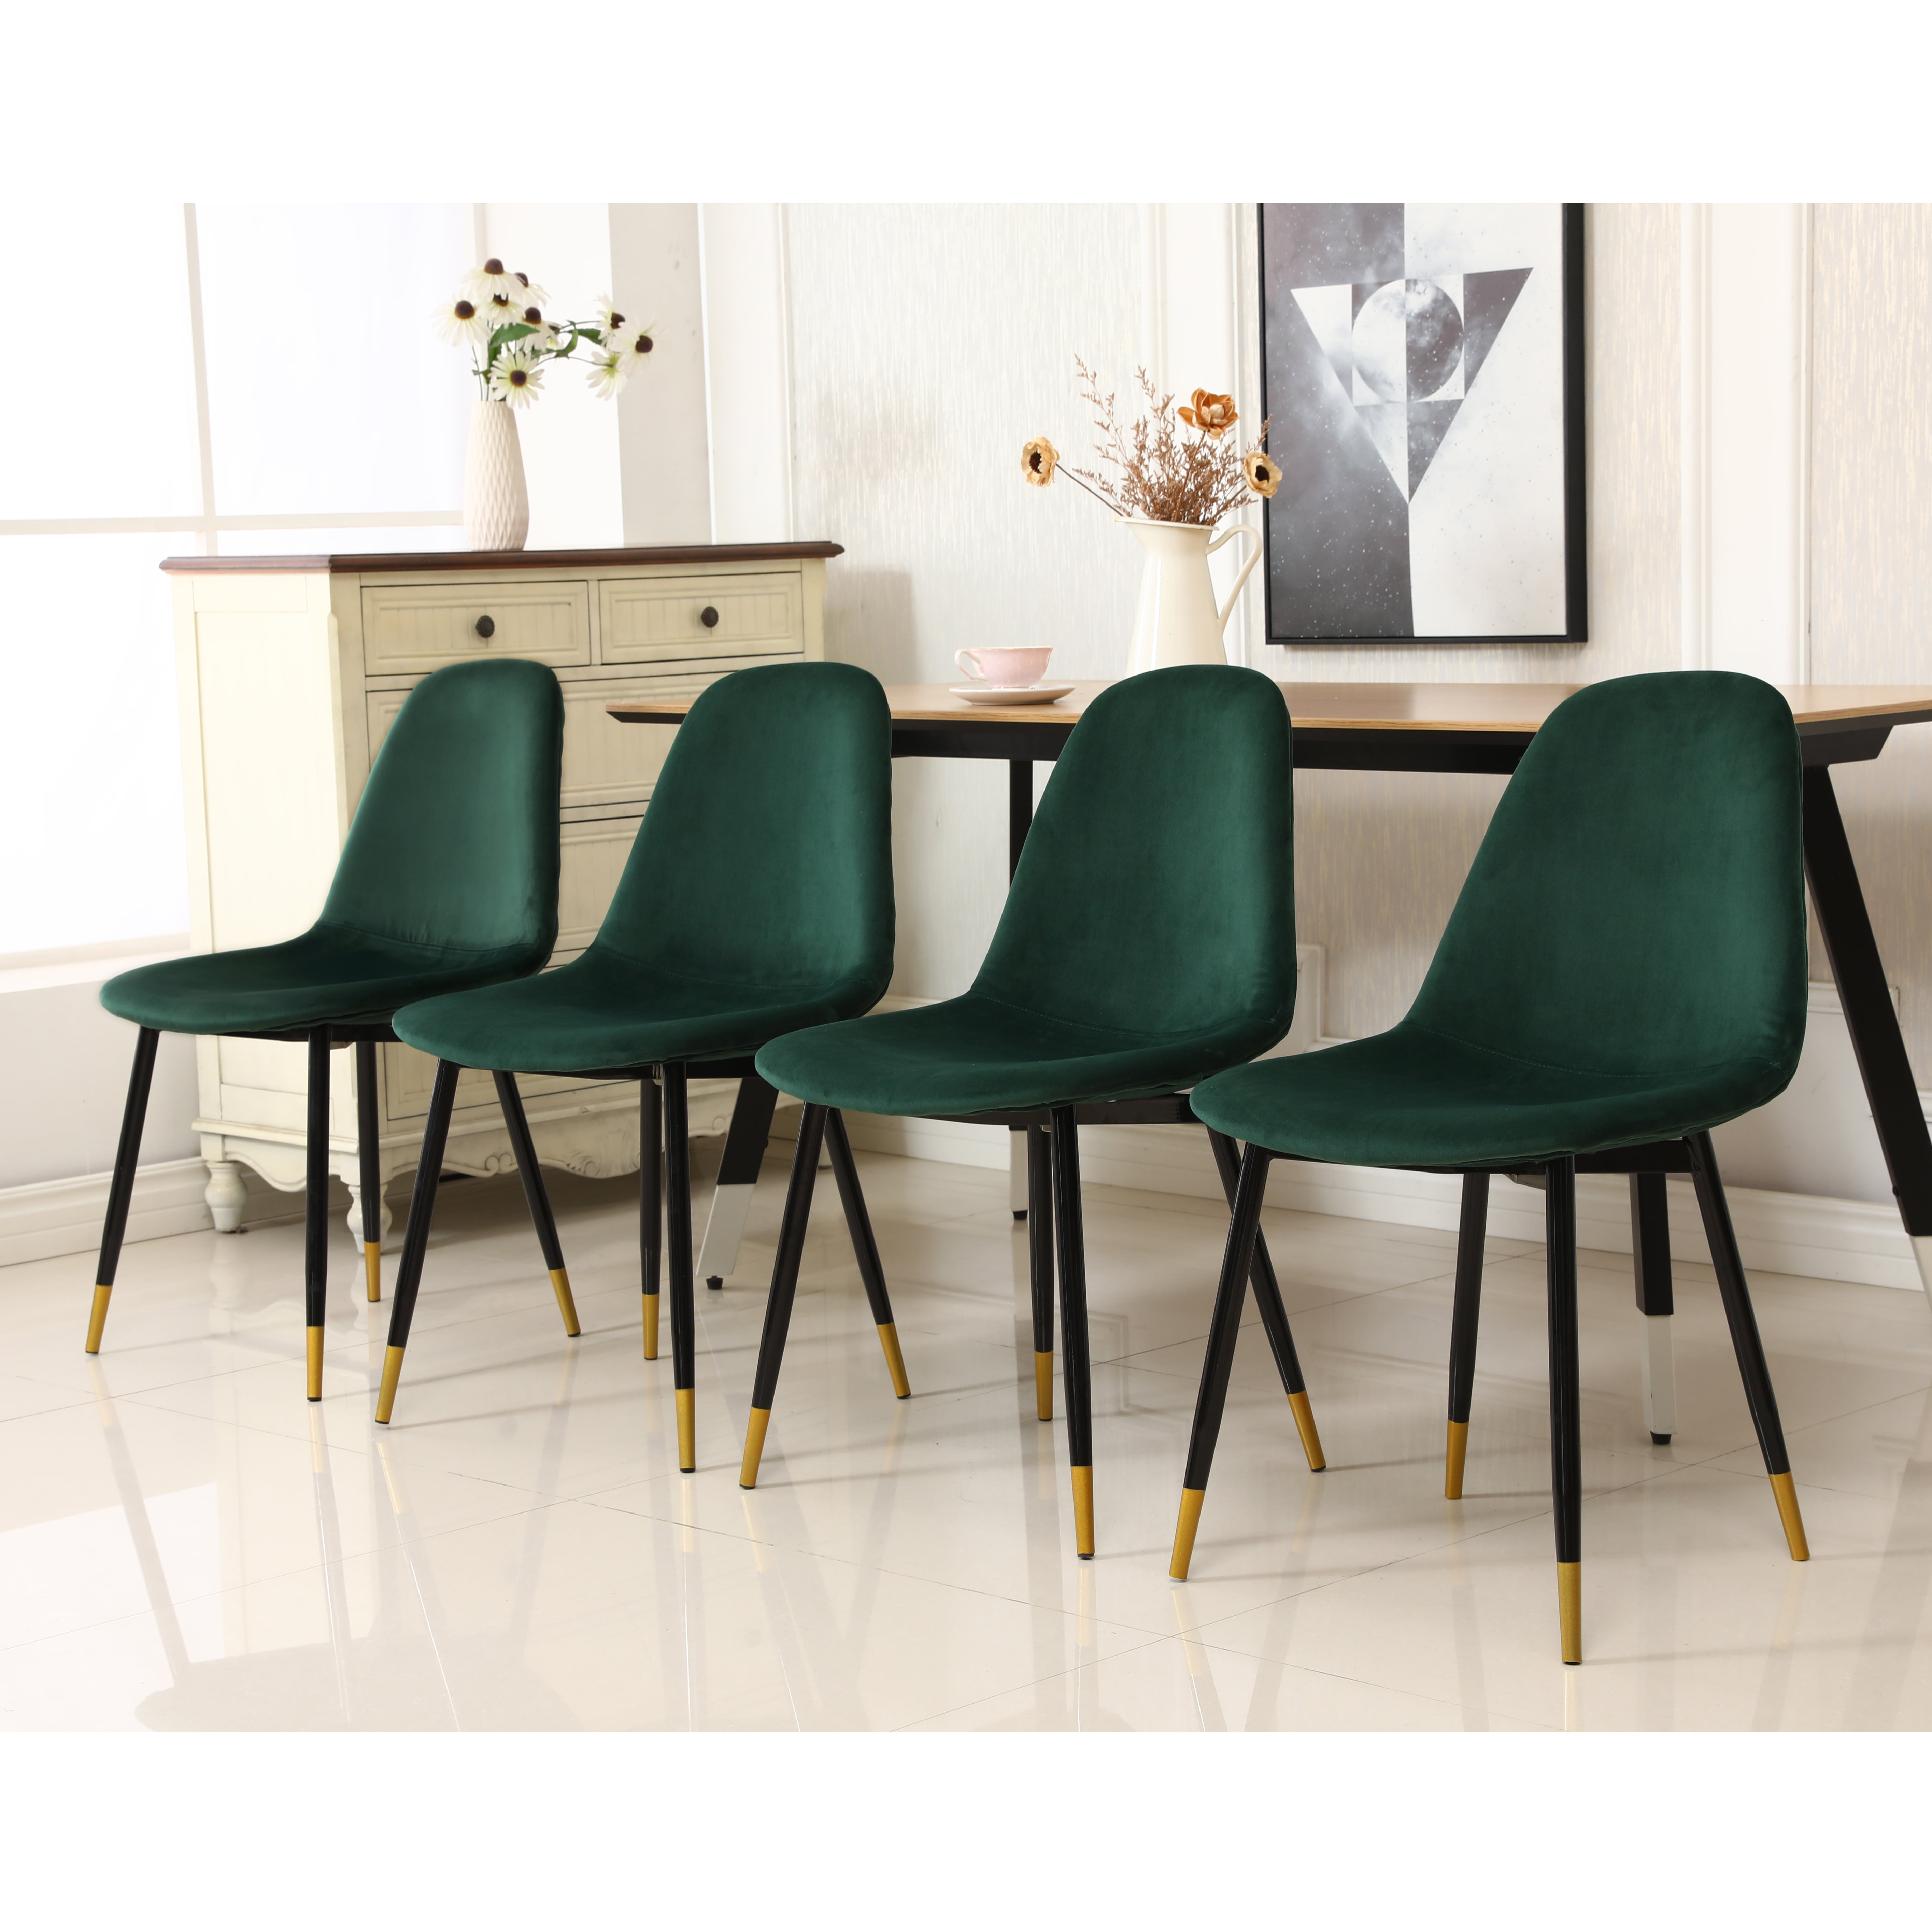 Lassan Contemporary Fabric Dining Chairs